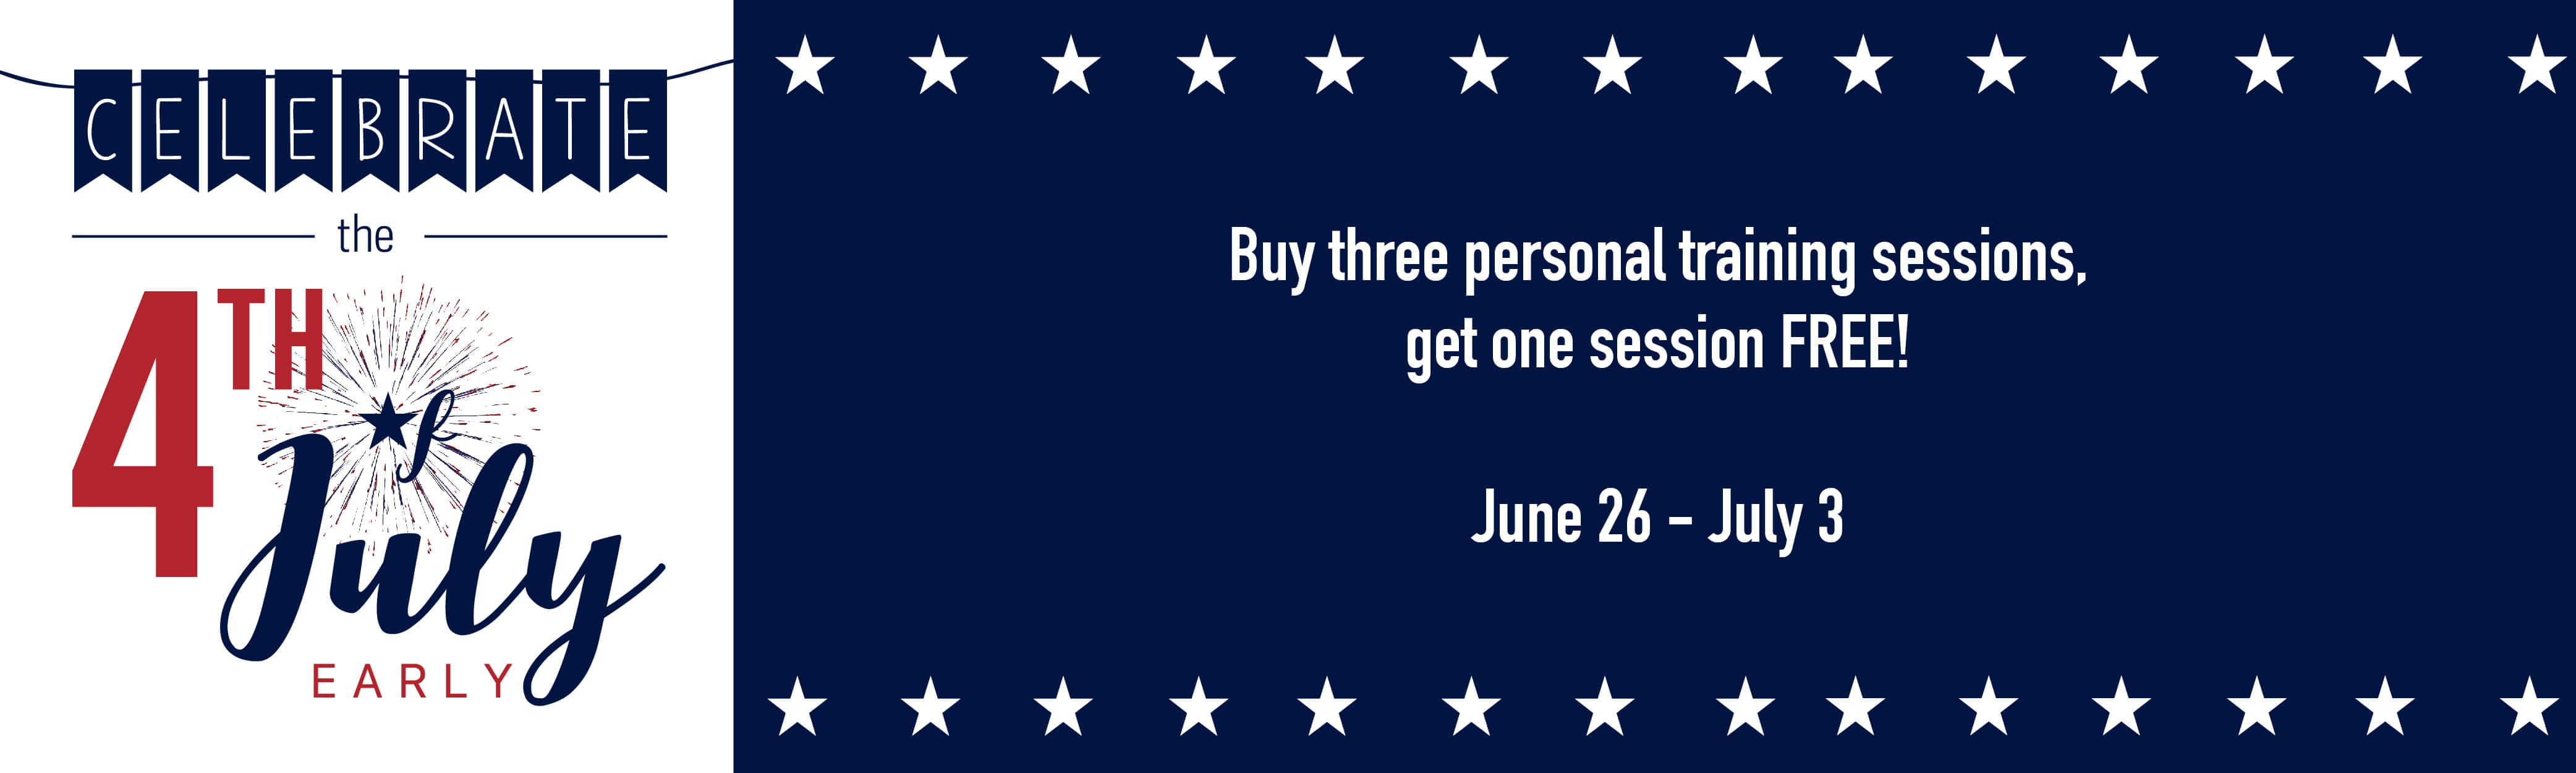 Notre Dame Recsports 4th Of July Personal Training Promo 2016 2016 Featured Image